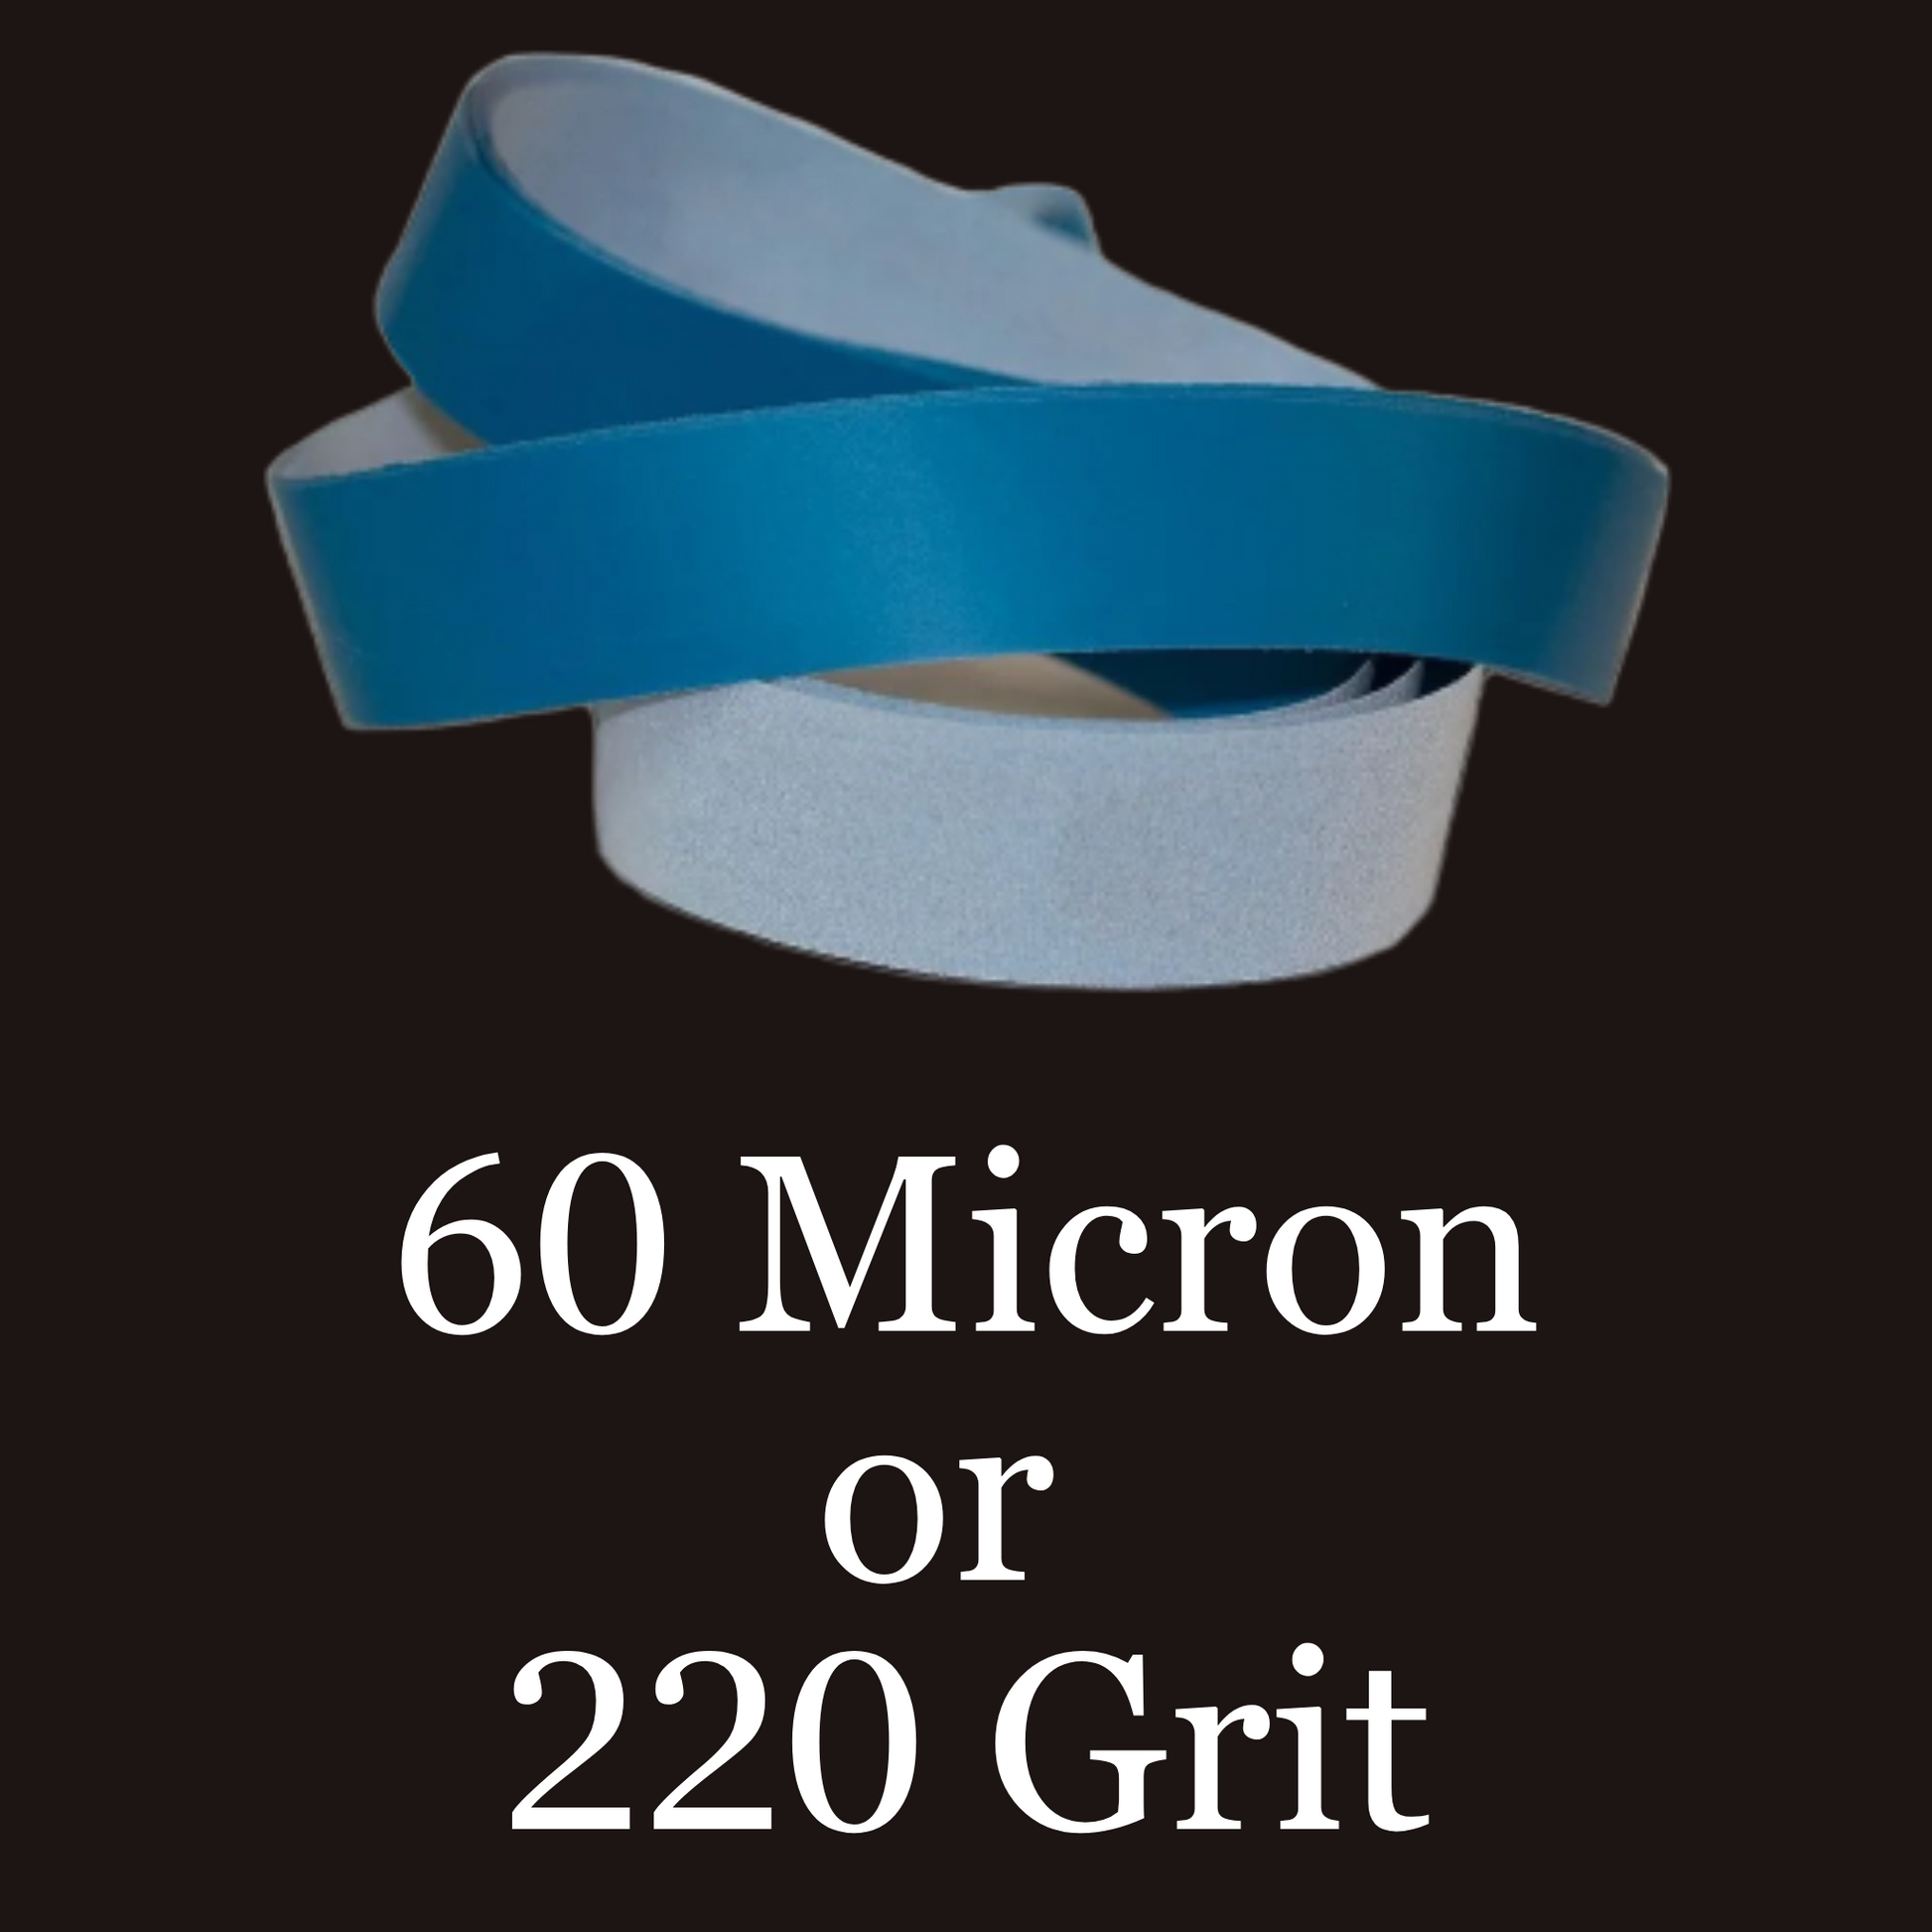 1” x 72” Film Micron Graded Finishing Belts 60 Micron or 220 Grit